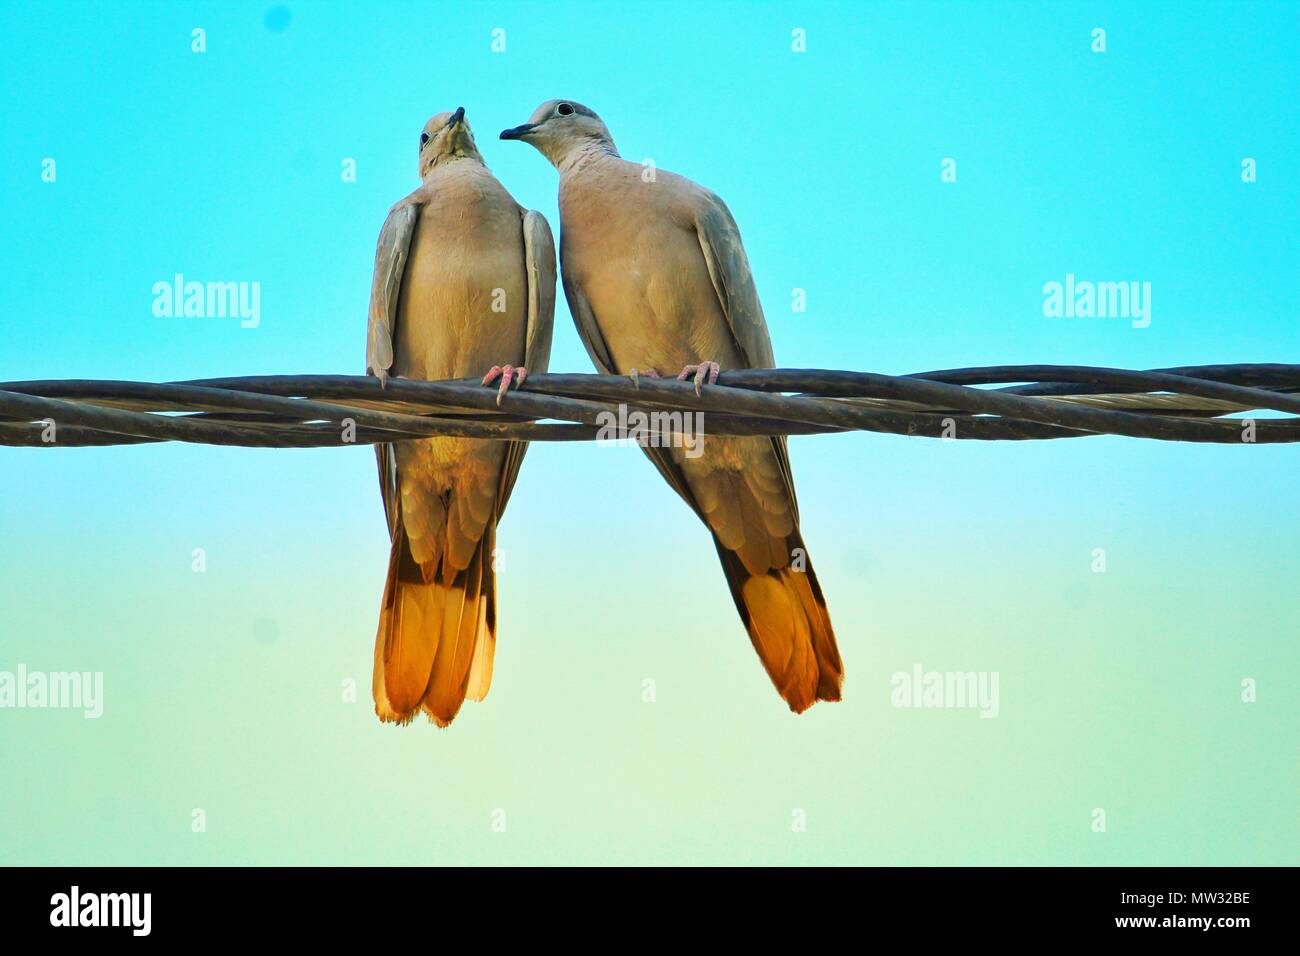 Two birds sit on wire and look into each other eyes. Stock Photo